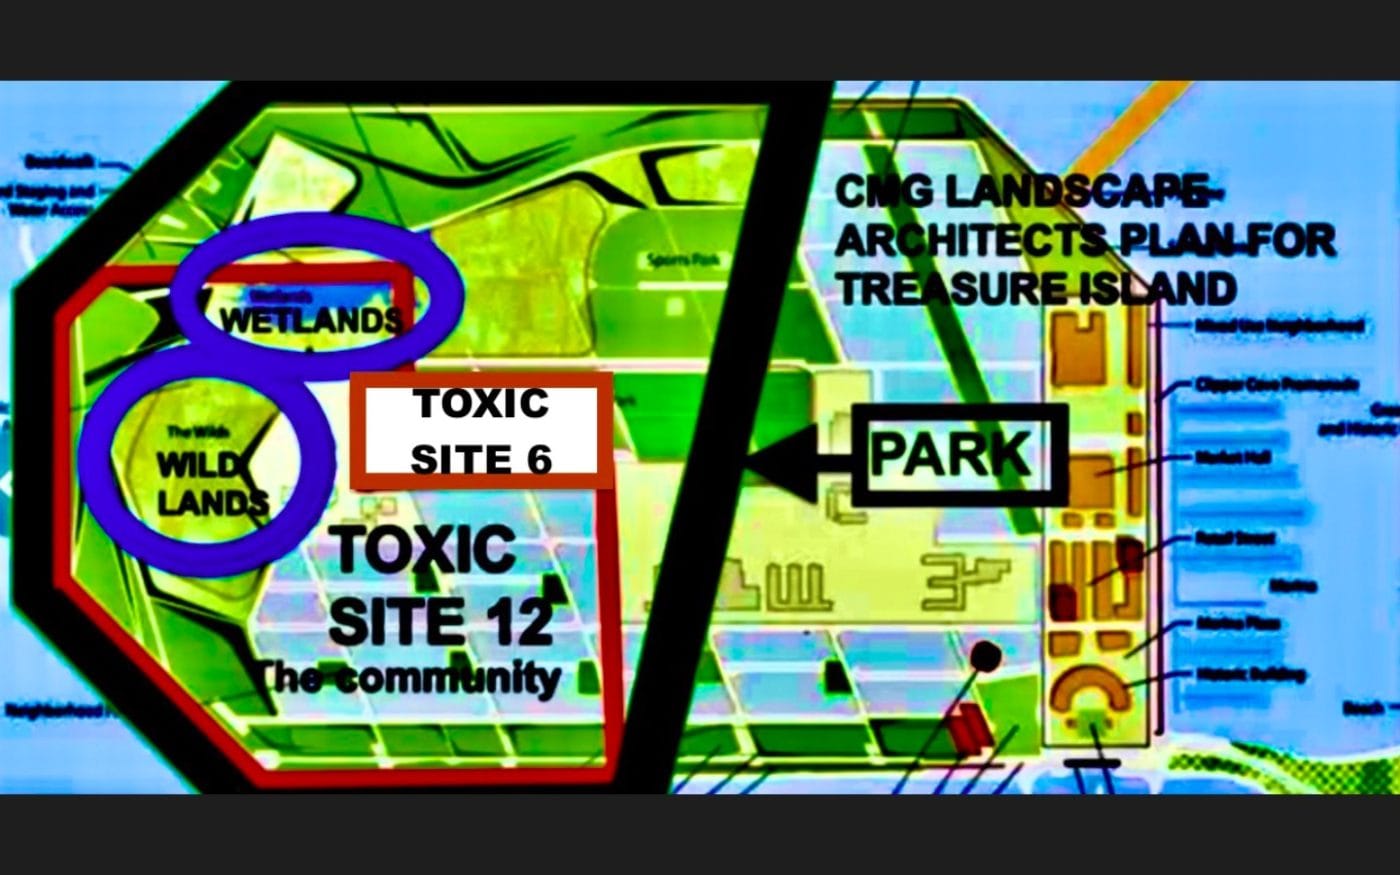 CMG-Plan-Toxic-Park-by-Carol-Harvey-1-1400x875, Dear Treasure Island Authority Board, thanks (but really no thanks) for the toxic parks!, Local News & Views 